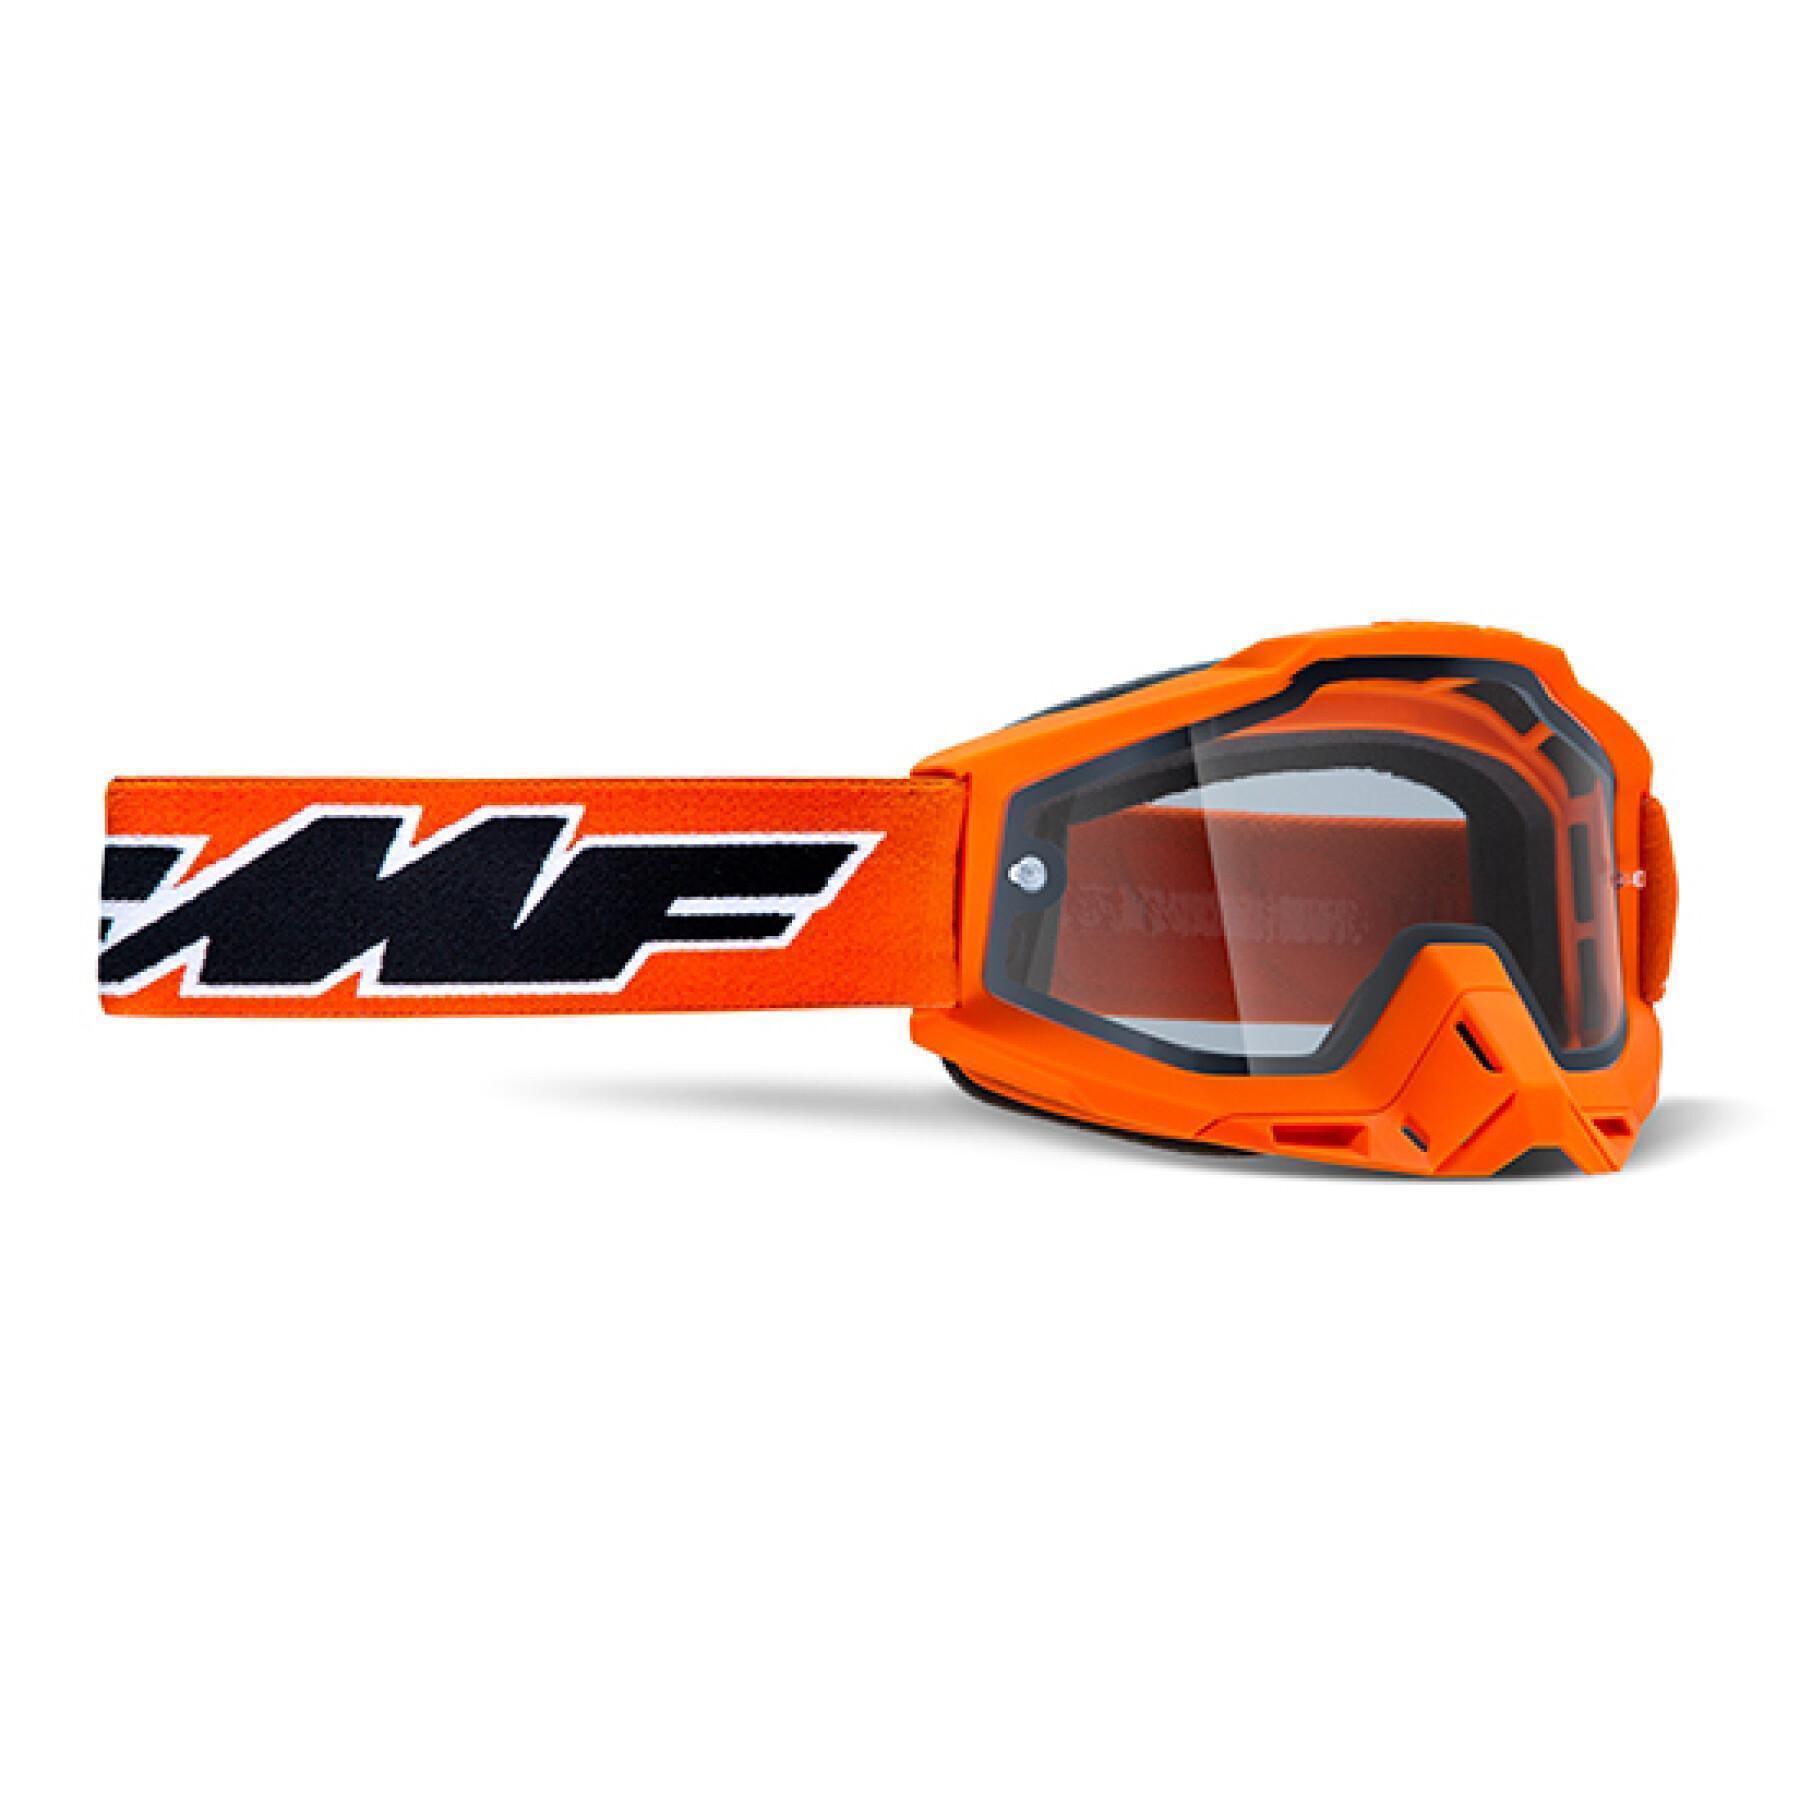 Motorcycle mask cross clear lens clear lens FMF Vision Powerbomb Enduro Rocket